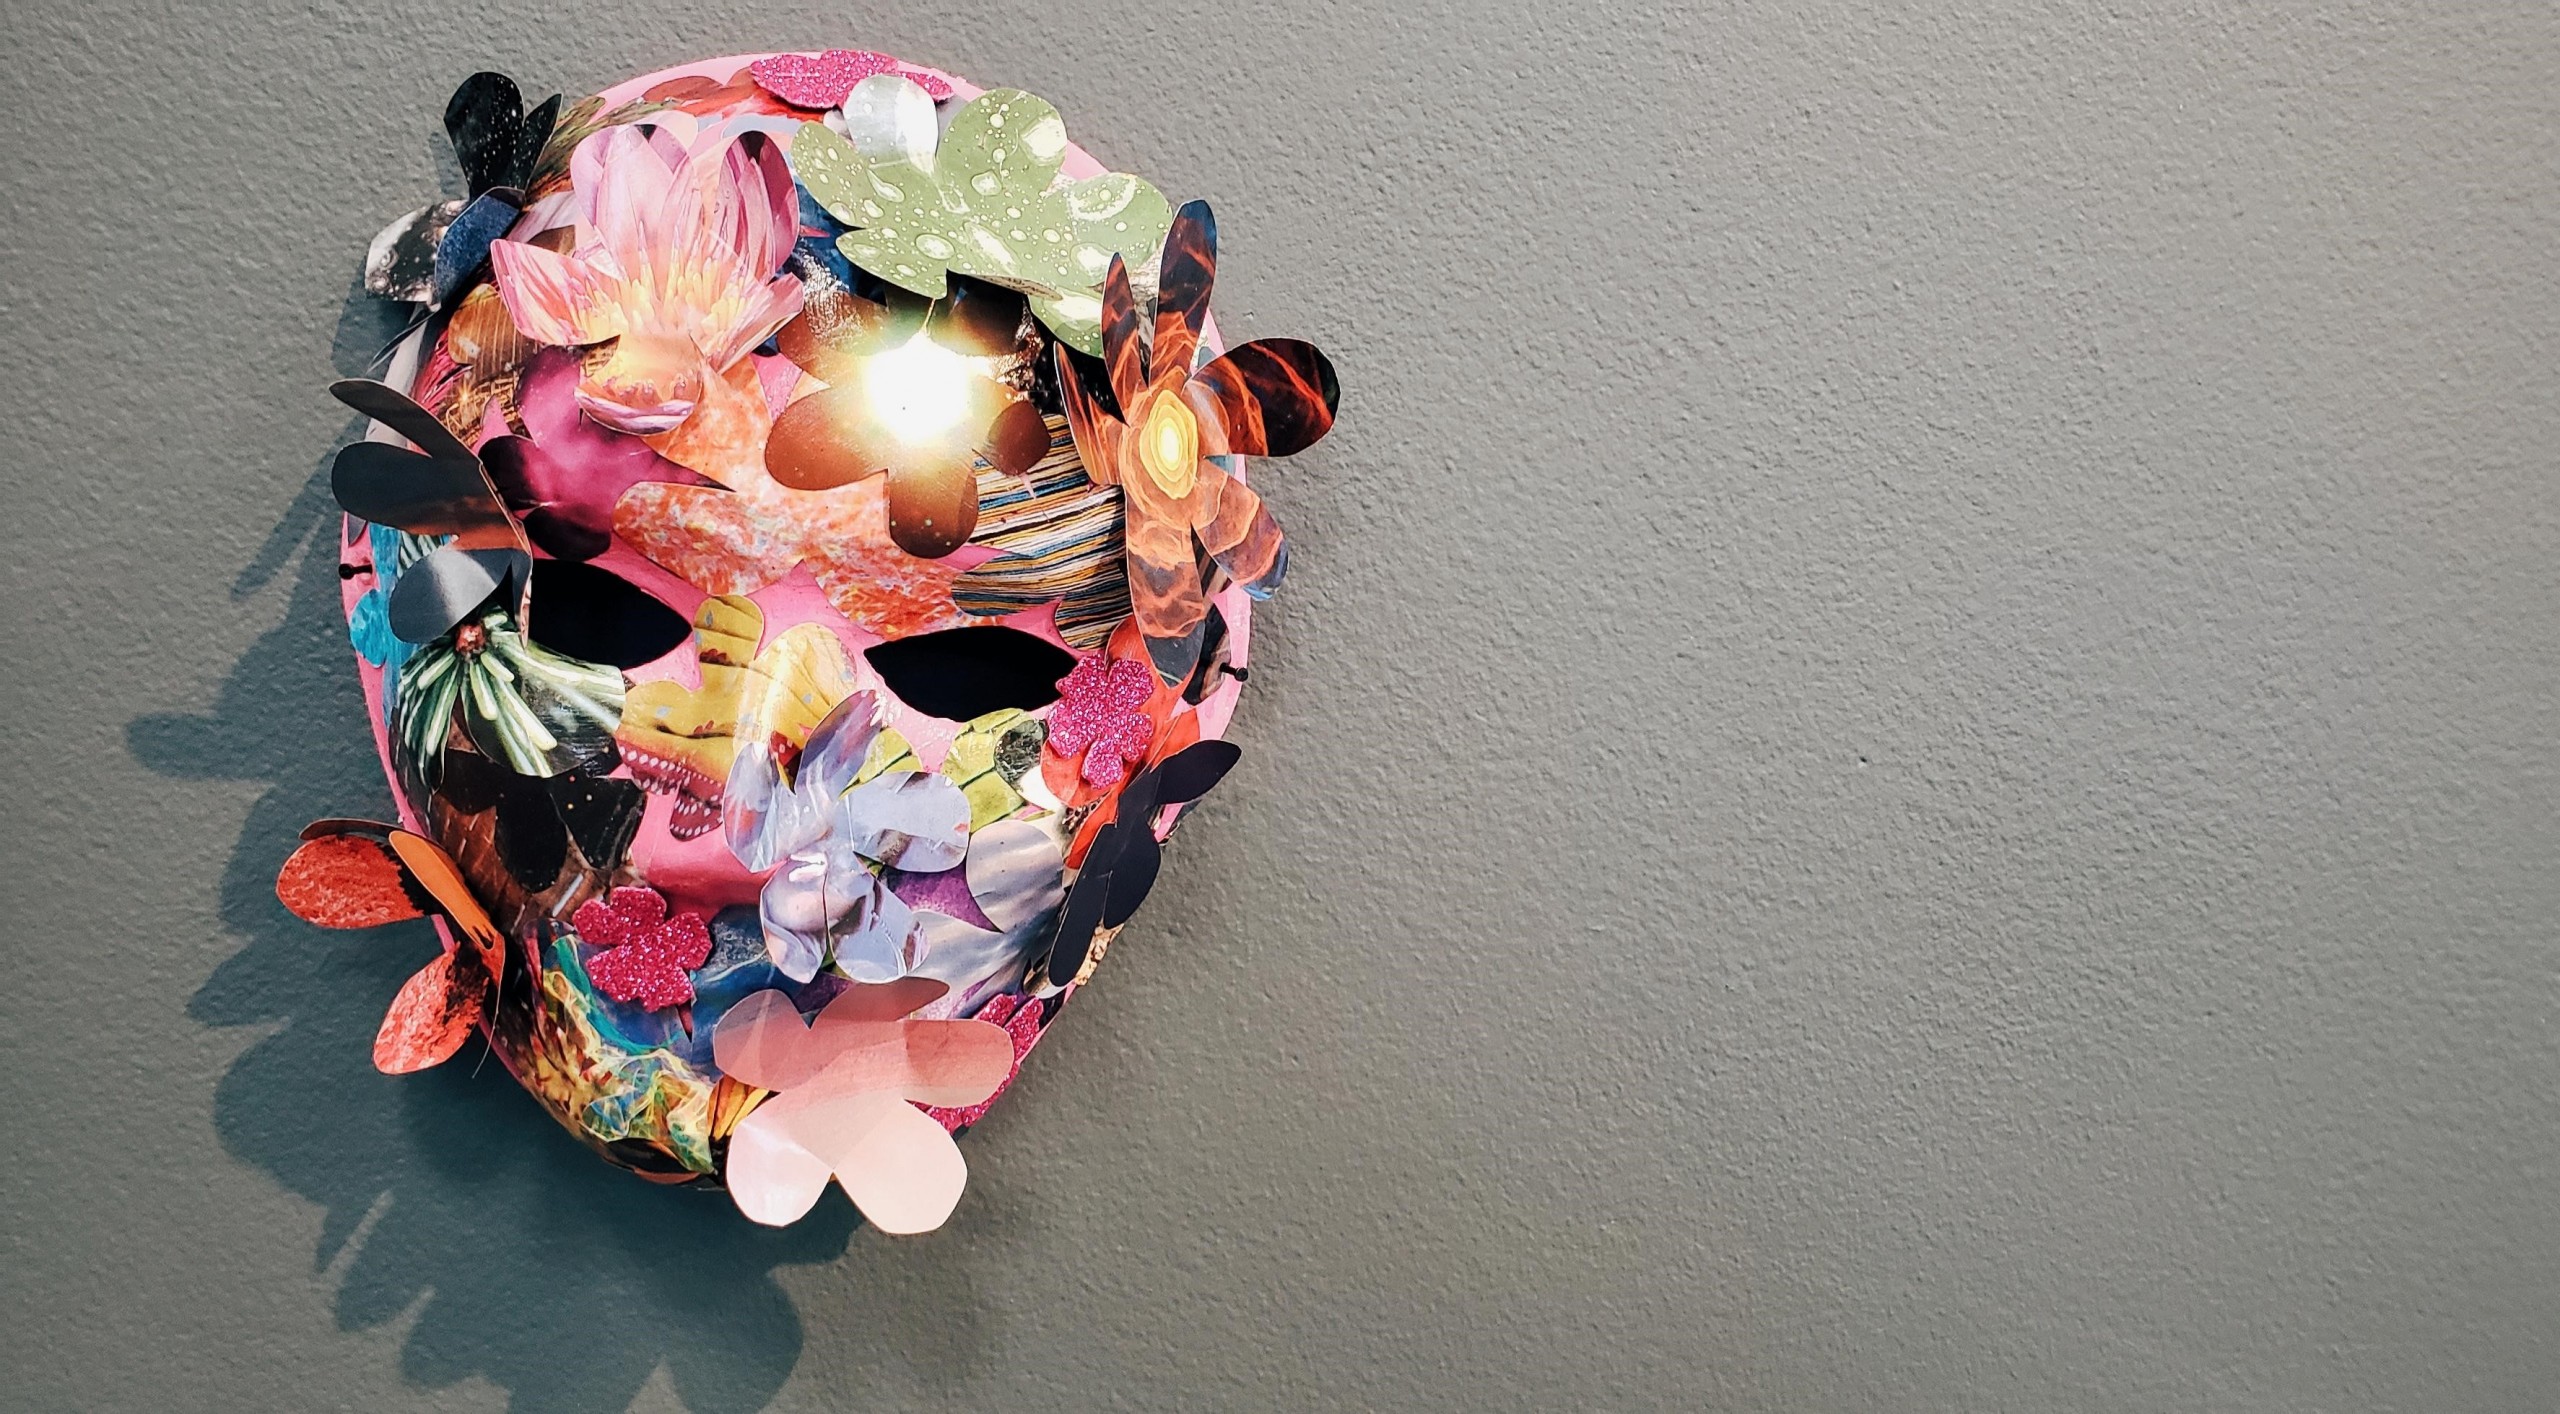 Promo Image: GTPulse: ‘Stay Safe’ Mask Exhibit Reflects on A Year of Solitude